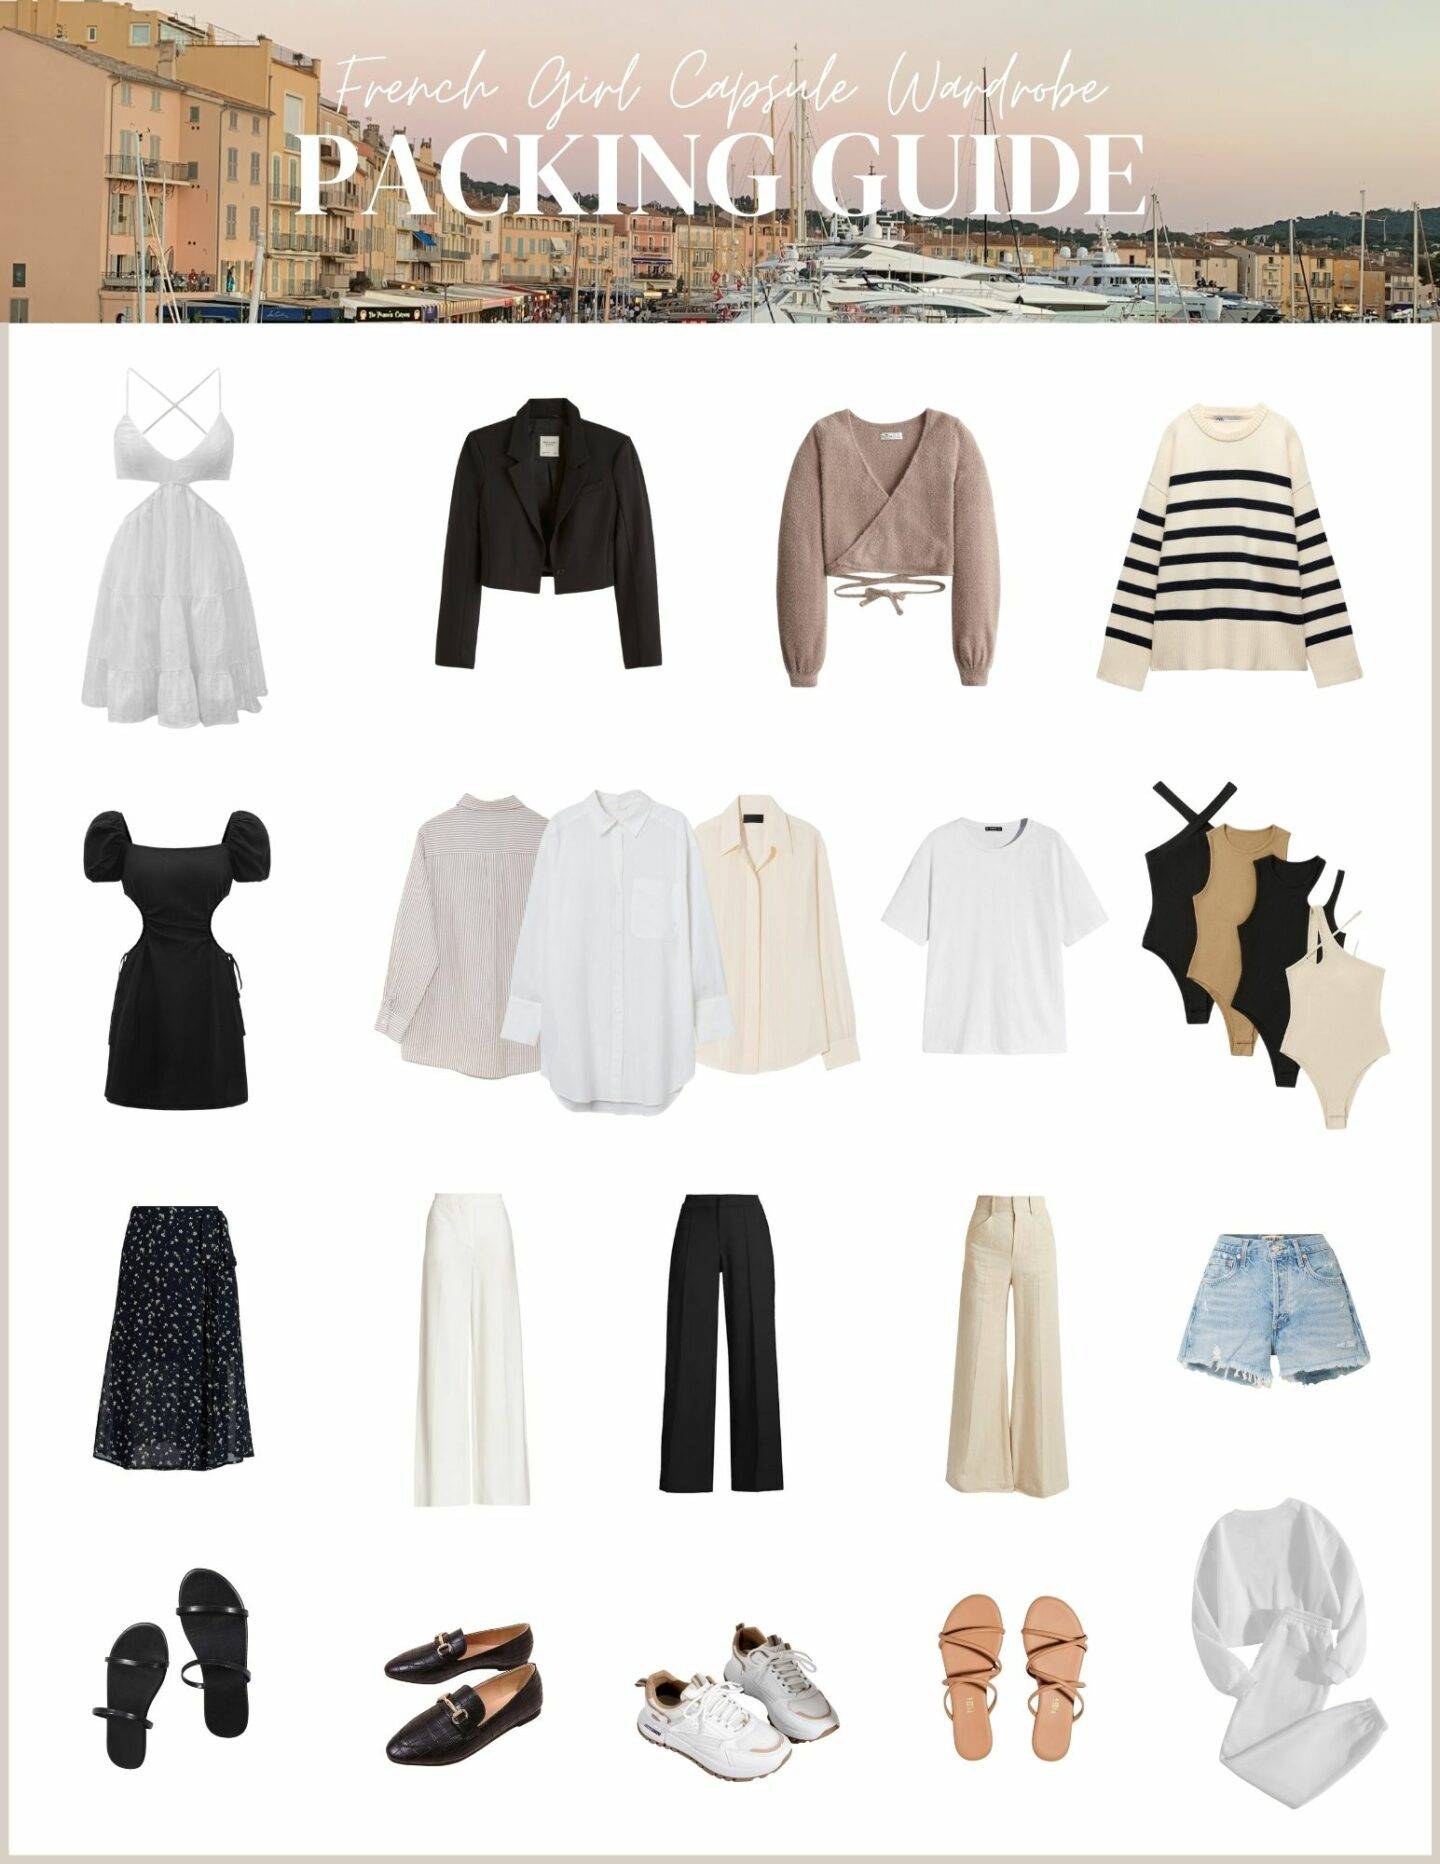 French Girl Capsule Wardrobe: Summer Vacation Packing Guide – My Equestrian  Style